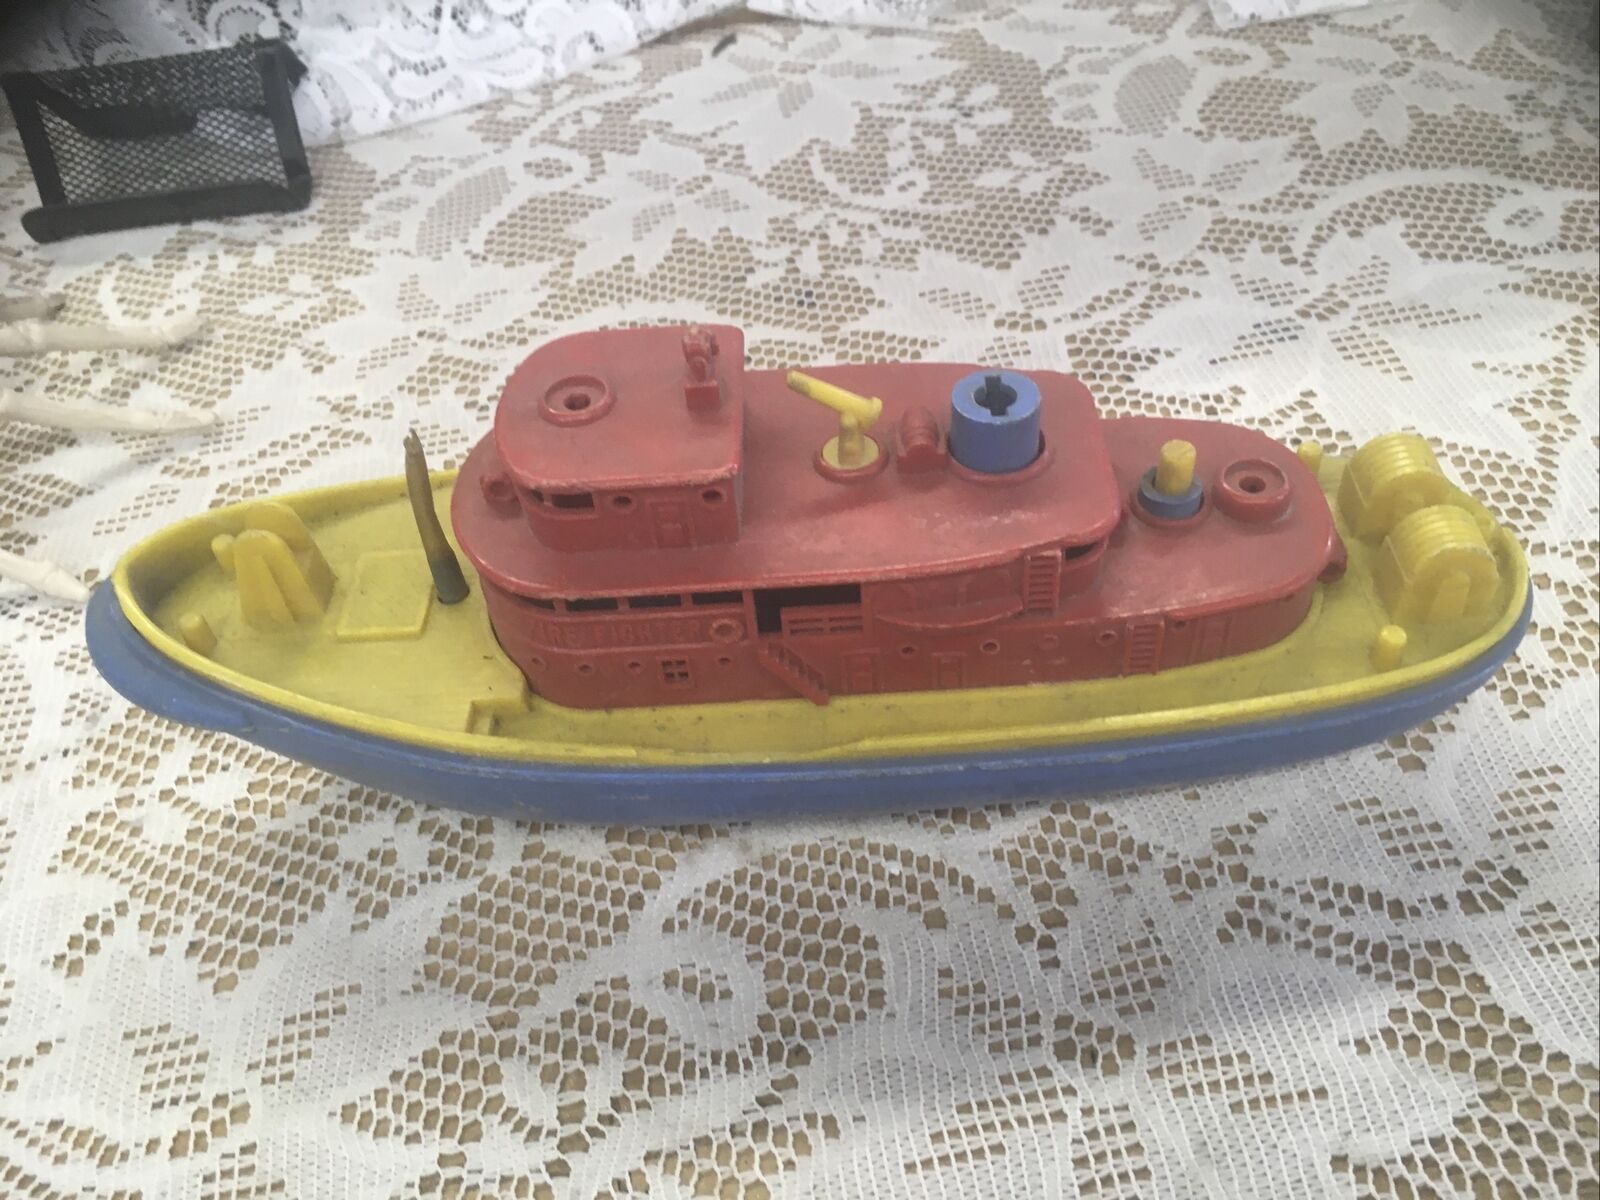 Vintage 1950's? Renwal Plastic Toy Fire Fighter Boat No.156— R A R E!— L O O K!